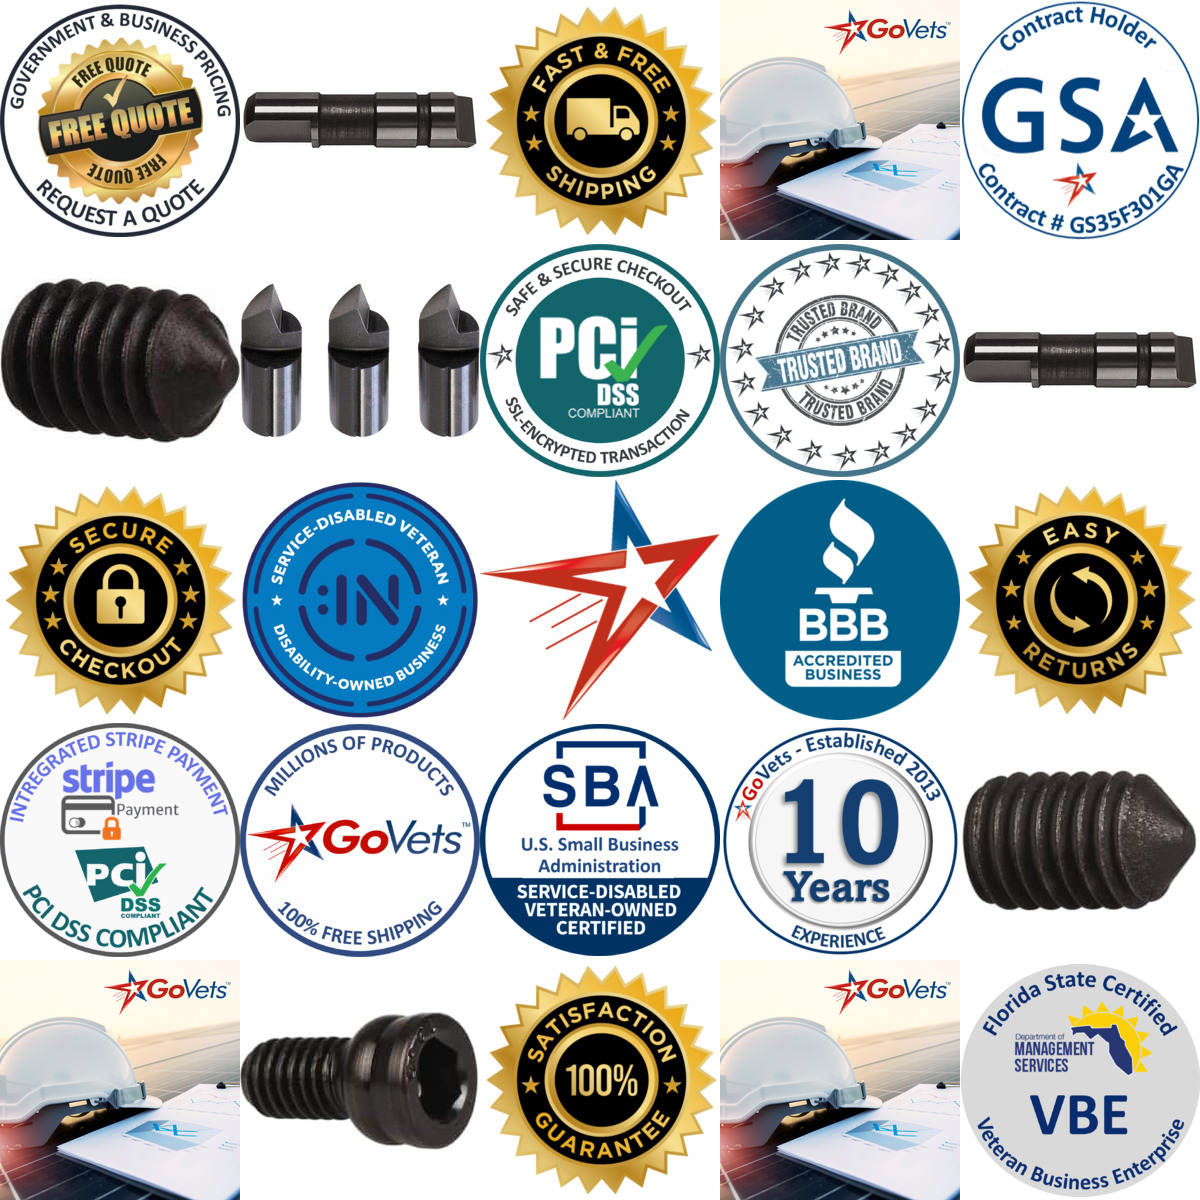 A selection of Face Driver Hardware and Accessories products on GoVets